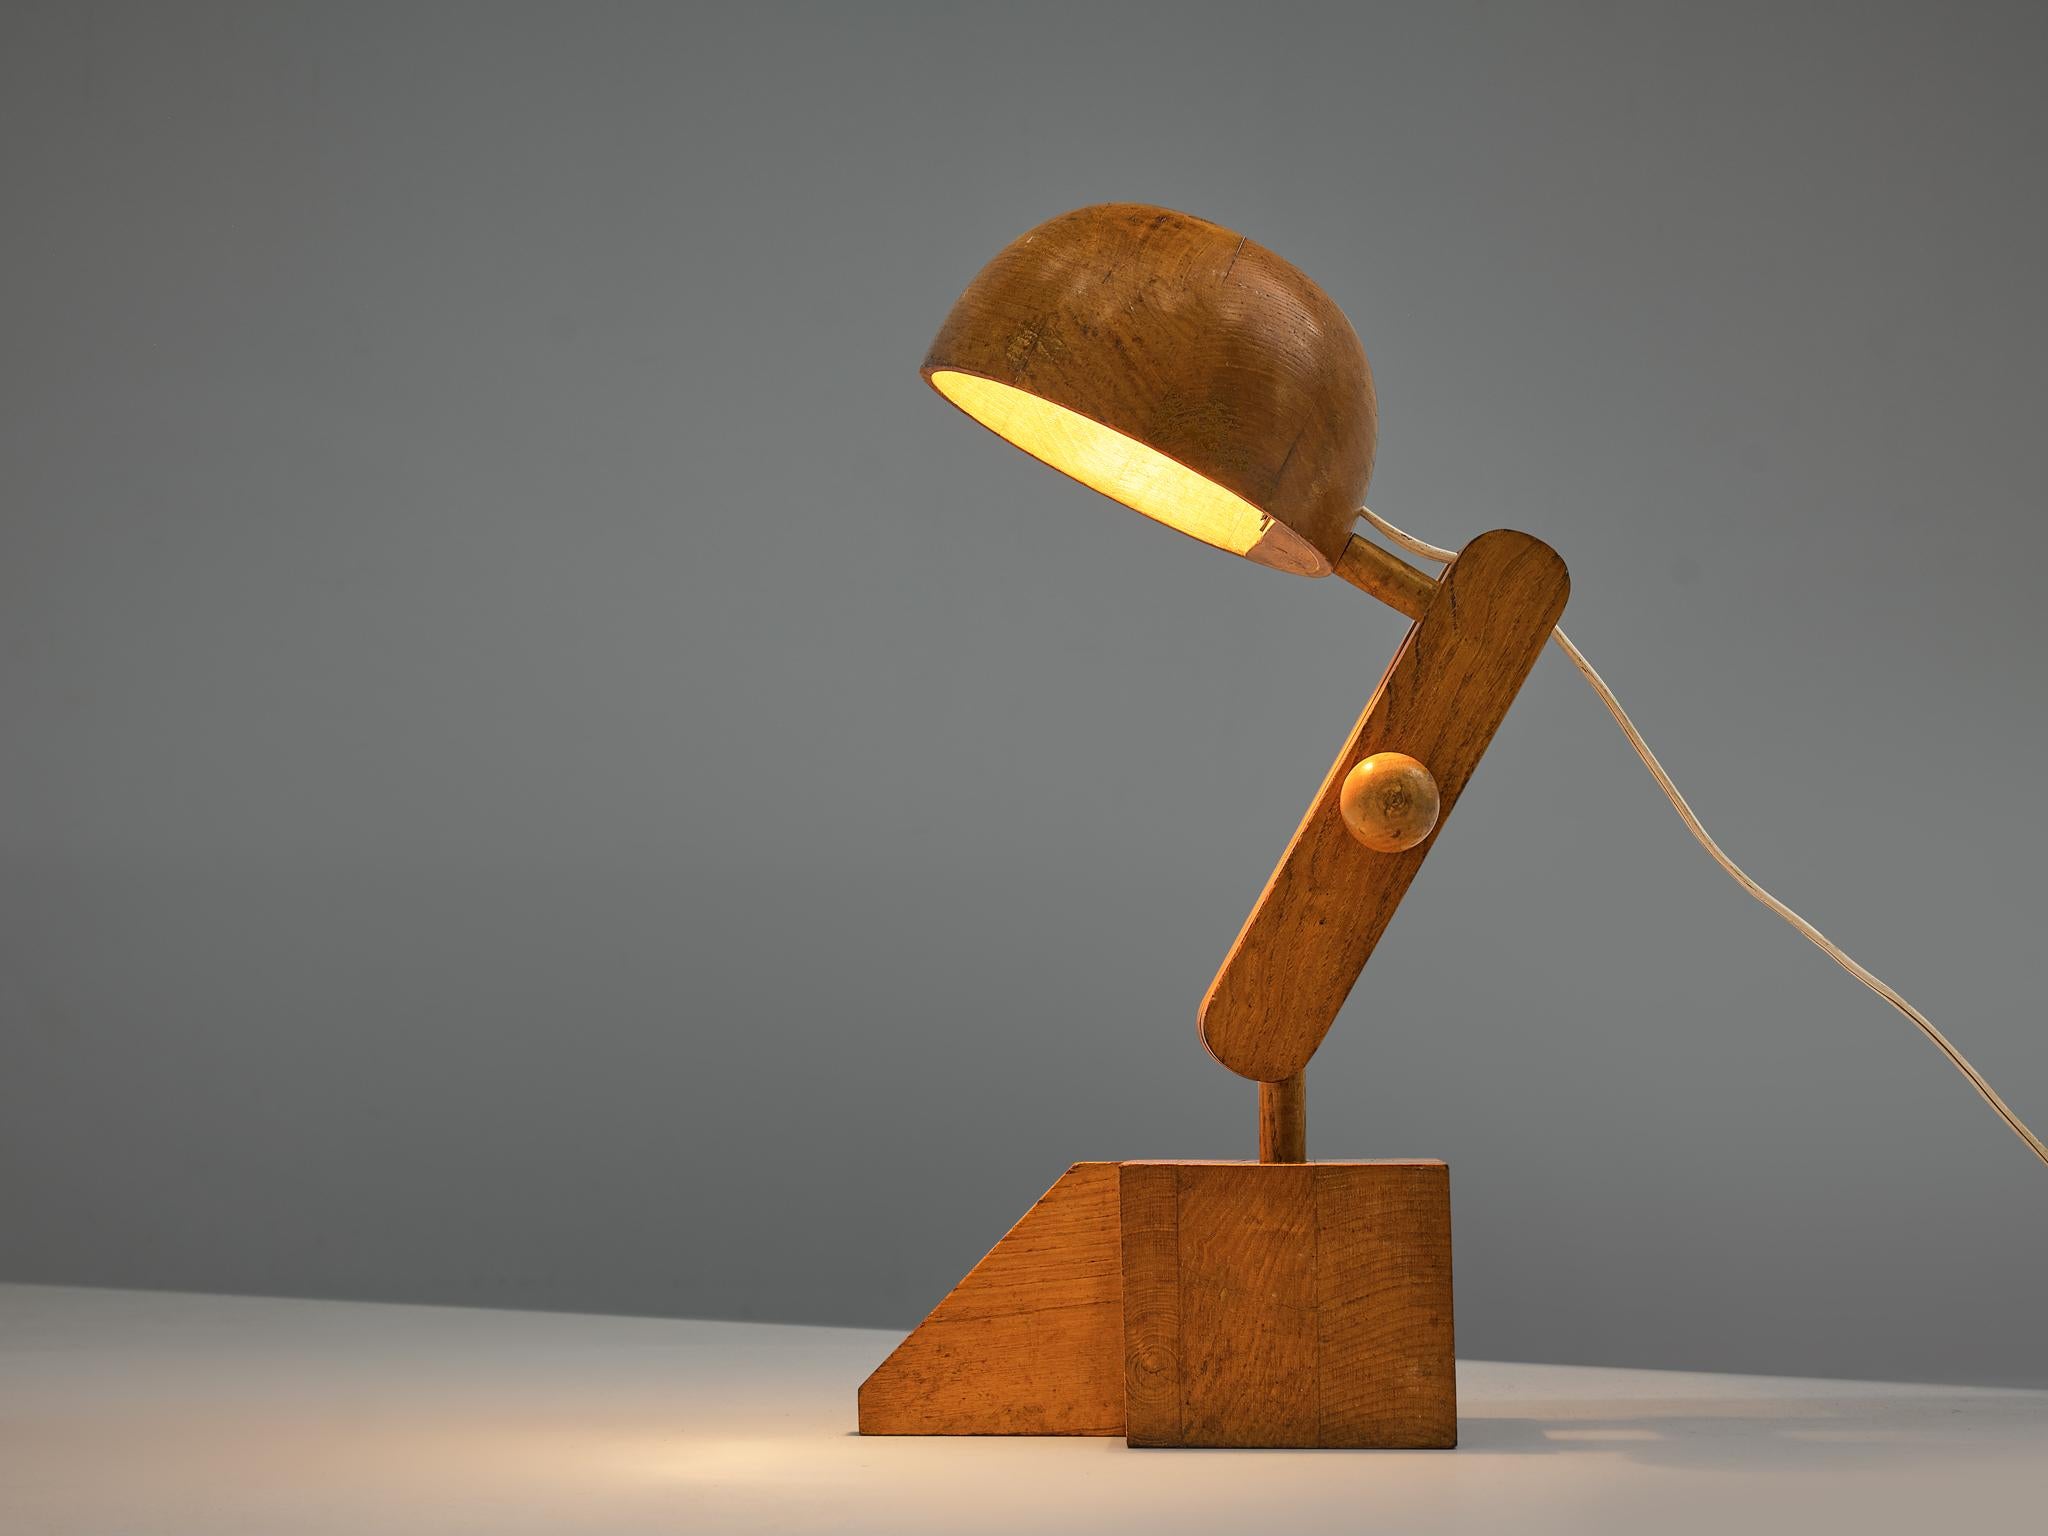 Paolo Pallucco for Pallucco Roma, table lamp, solid oak, Italy, 1960s

Functional yet playful desk lamp in characteristic material and shape. Paolo Pallucco used solid oak for his design of an adjustable desk lamp. A cube with extensive slat forms